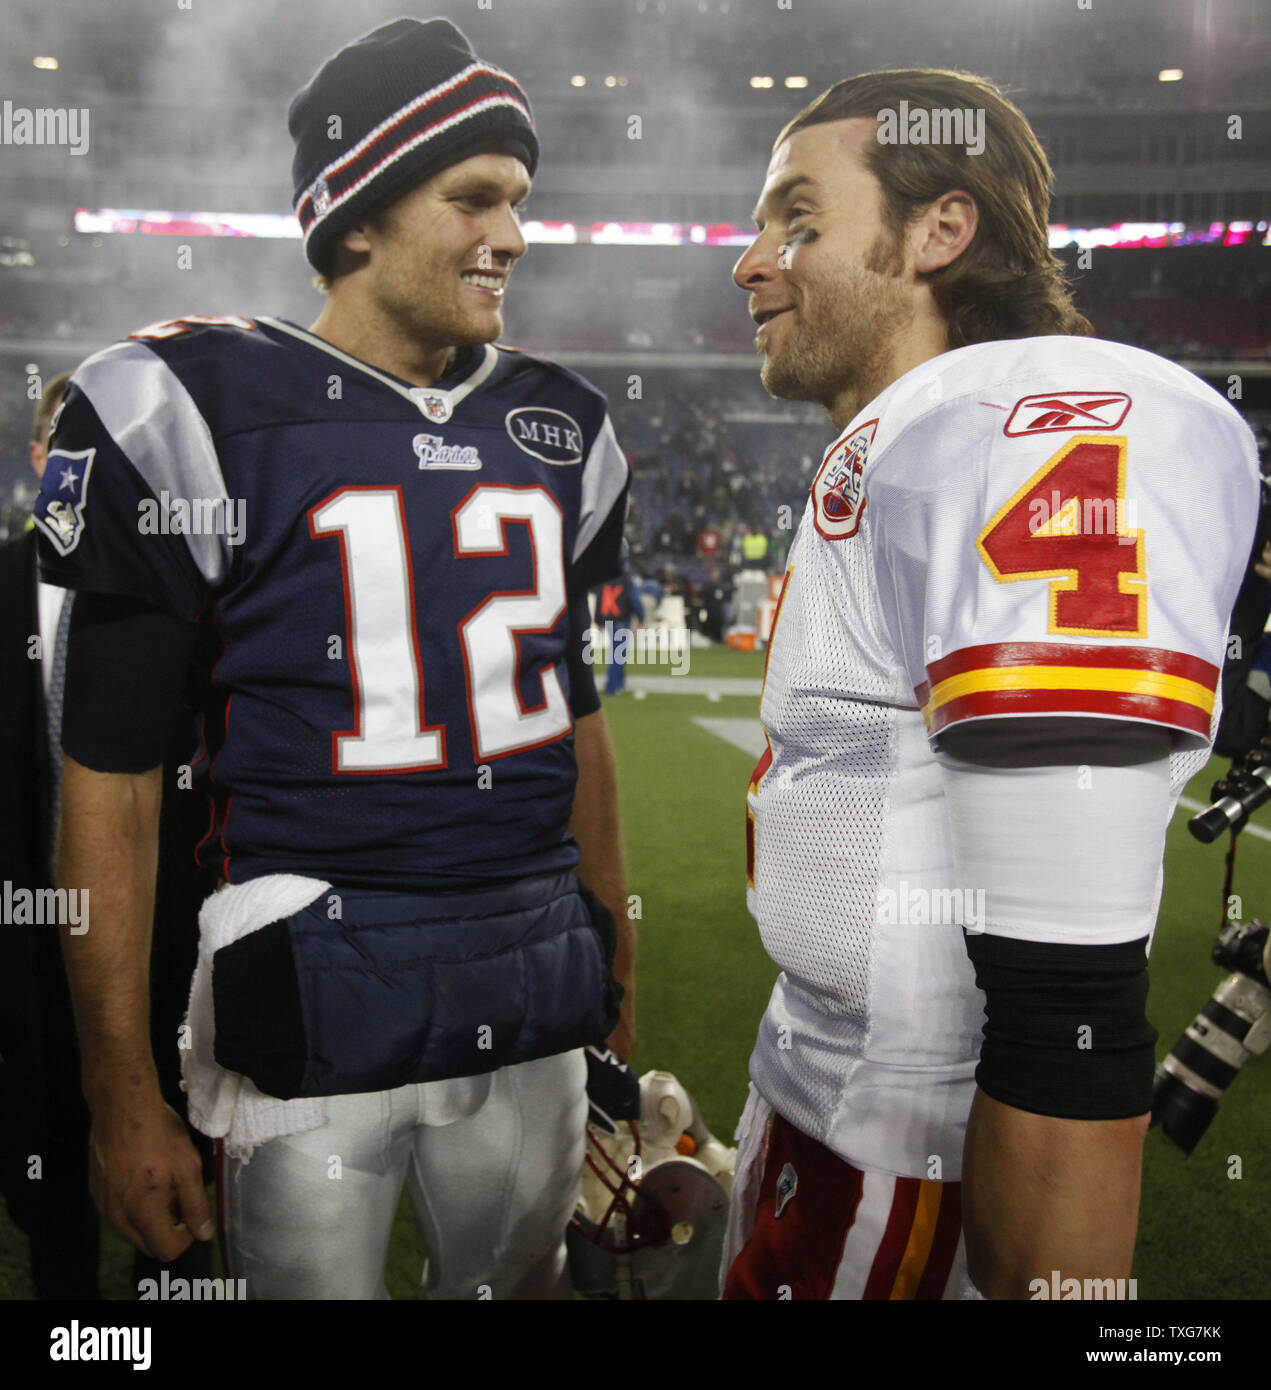 New England Patriots quarterback Tom Brady (12) chats with Kansas City Chiefs quarterback Tyler Palko after the game at Gillette Stadium in Foxboro, Massachusetts on November 21, 2011.  The Patriots defeated the Chiefs 34-3.   UPI/Matthew Healey Stock Photo